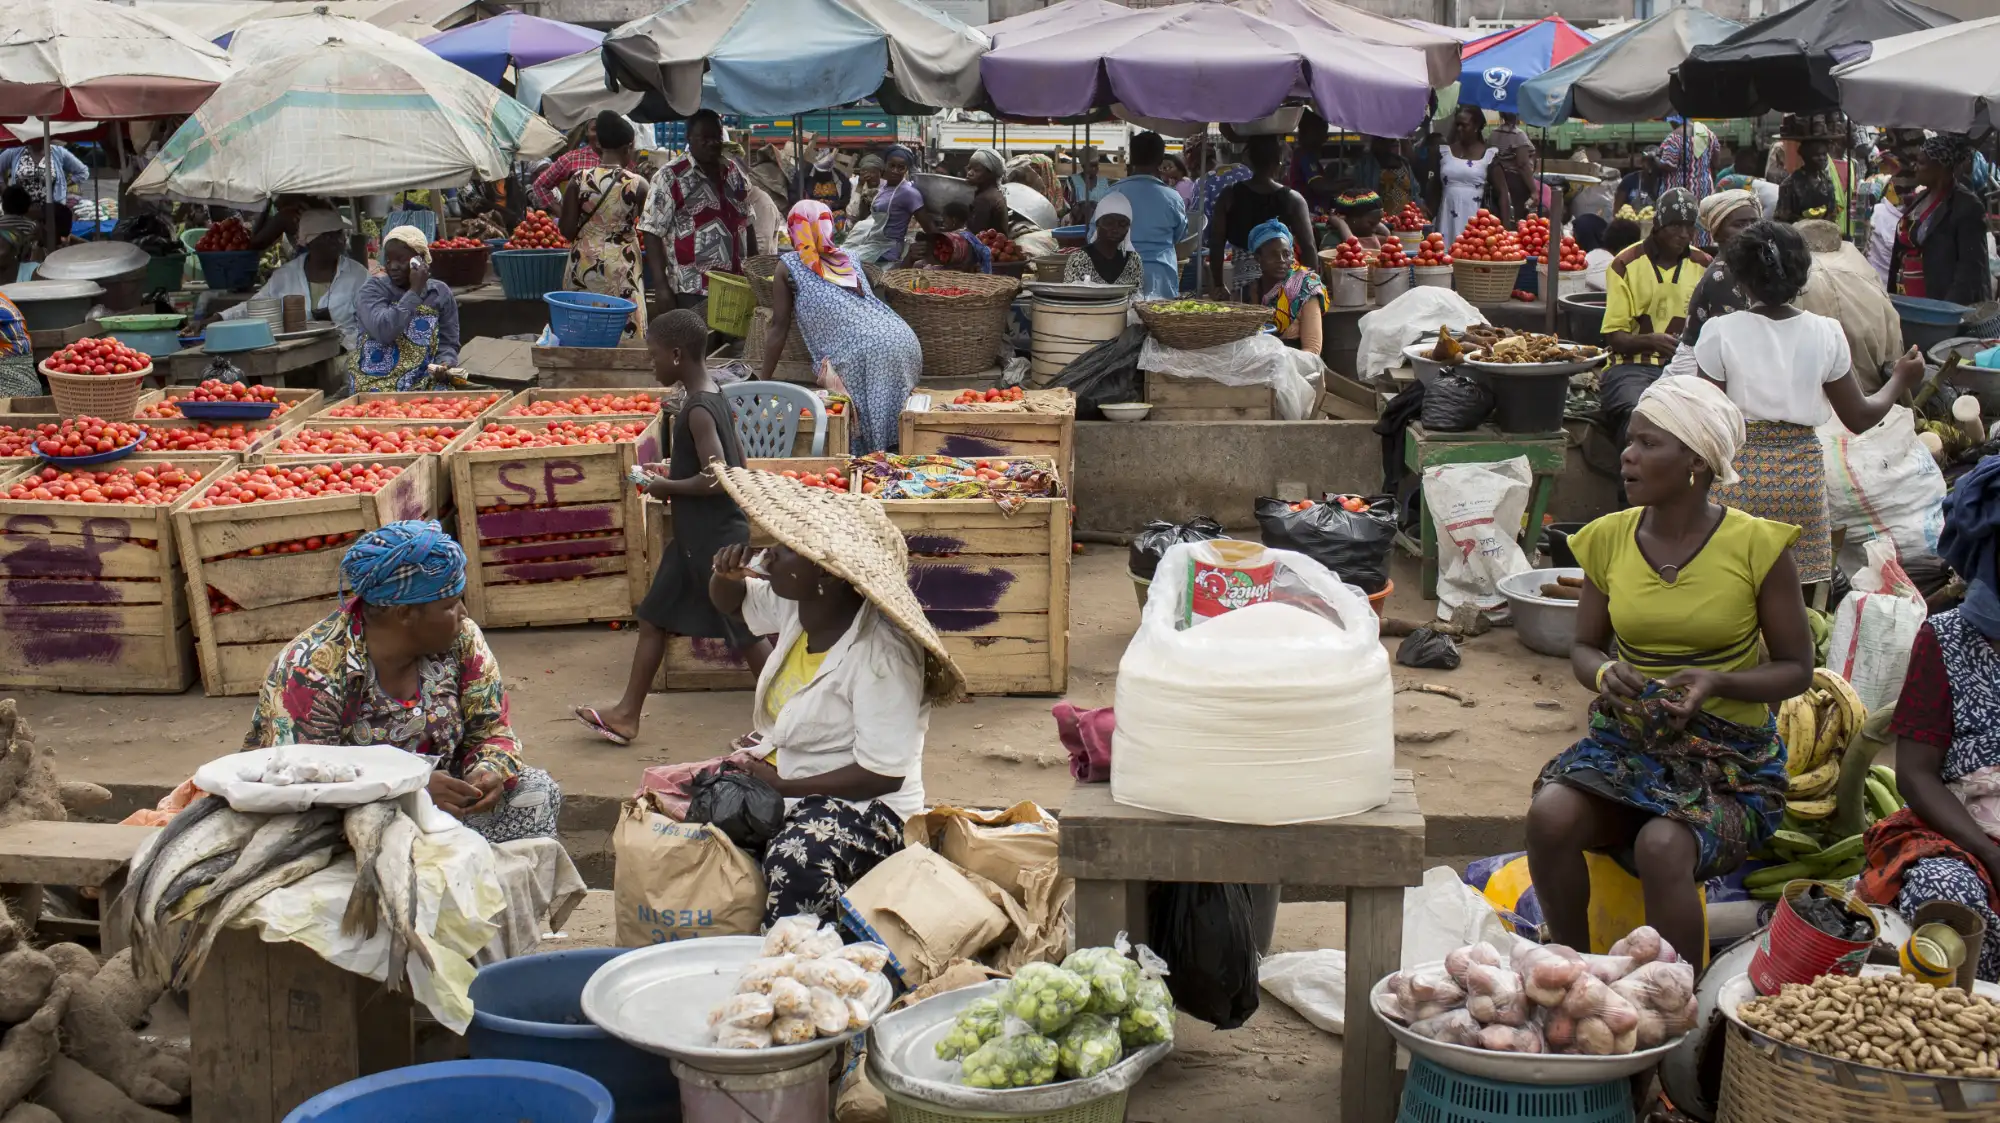 A busy market with stalls of fruit and vegetables